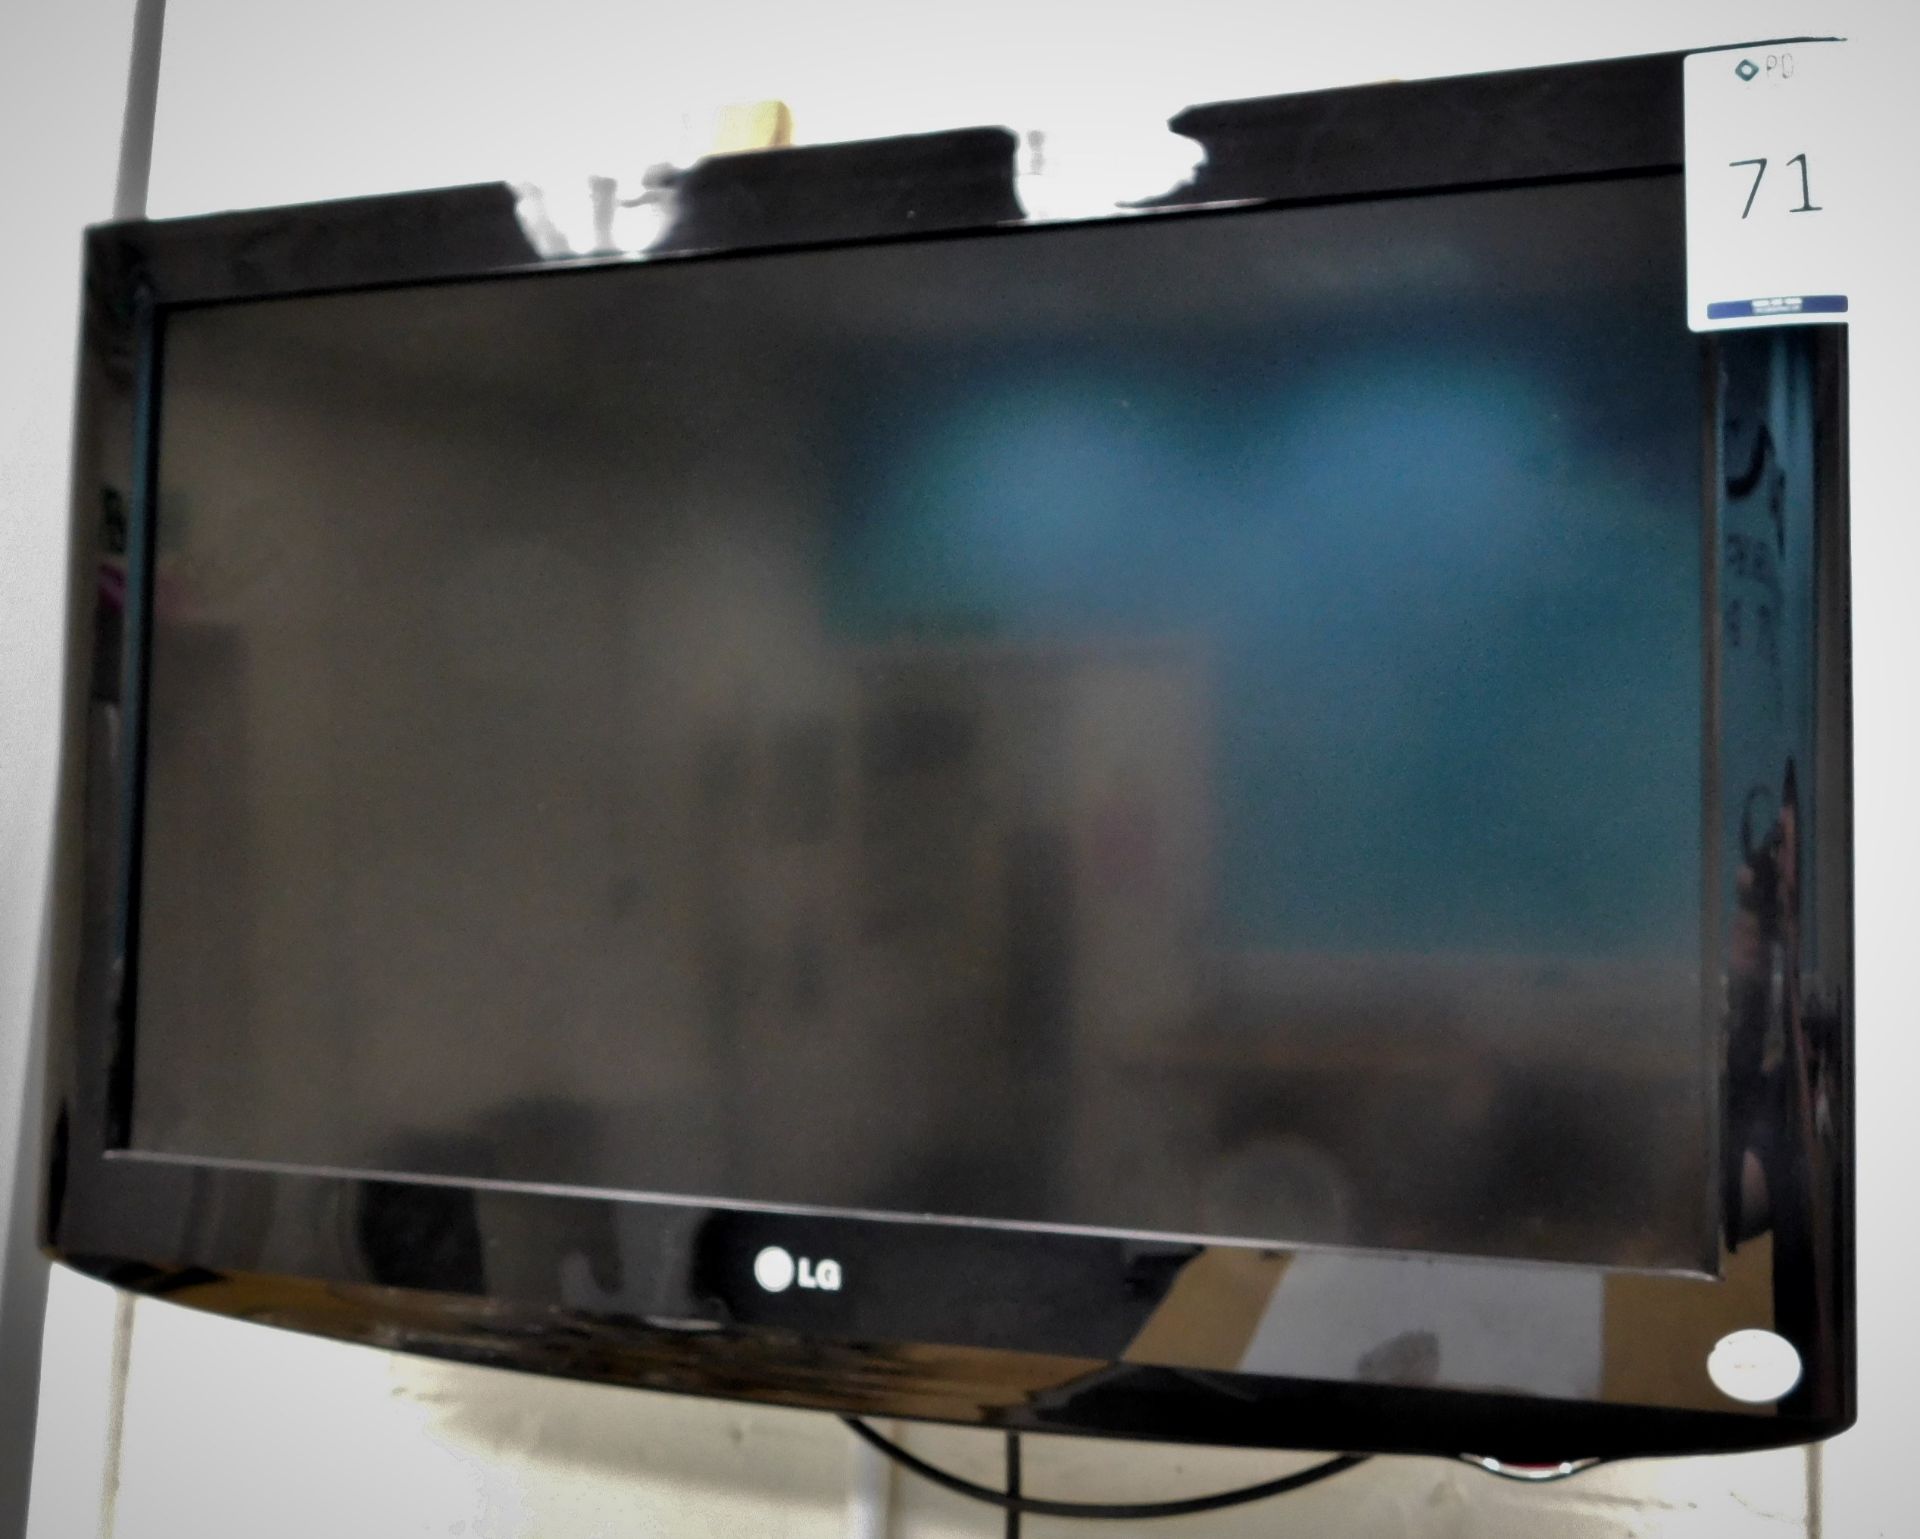 LG Model 32LH2000-ZA 32” TV, Serial Number 002JBHE3Y393 with Remote (Location: Hatfield - See